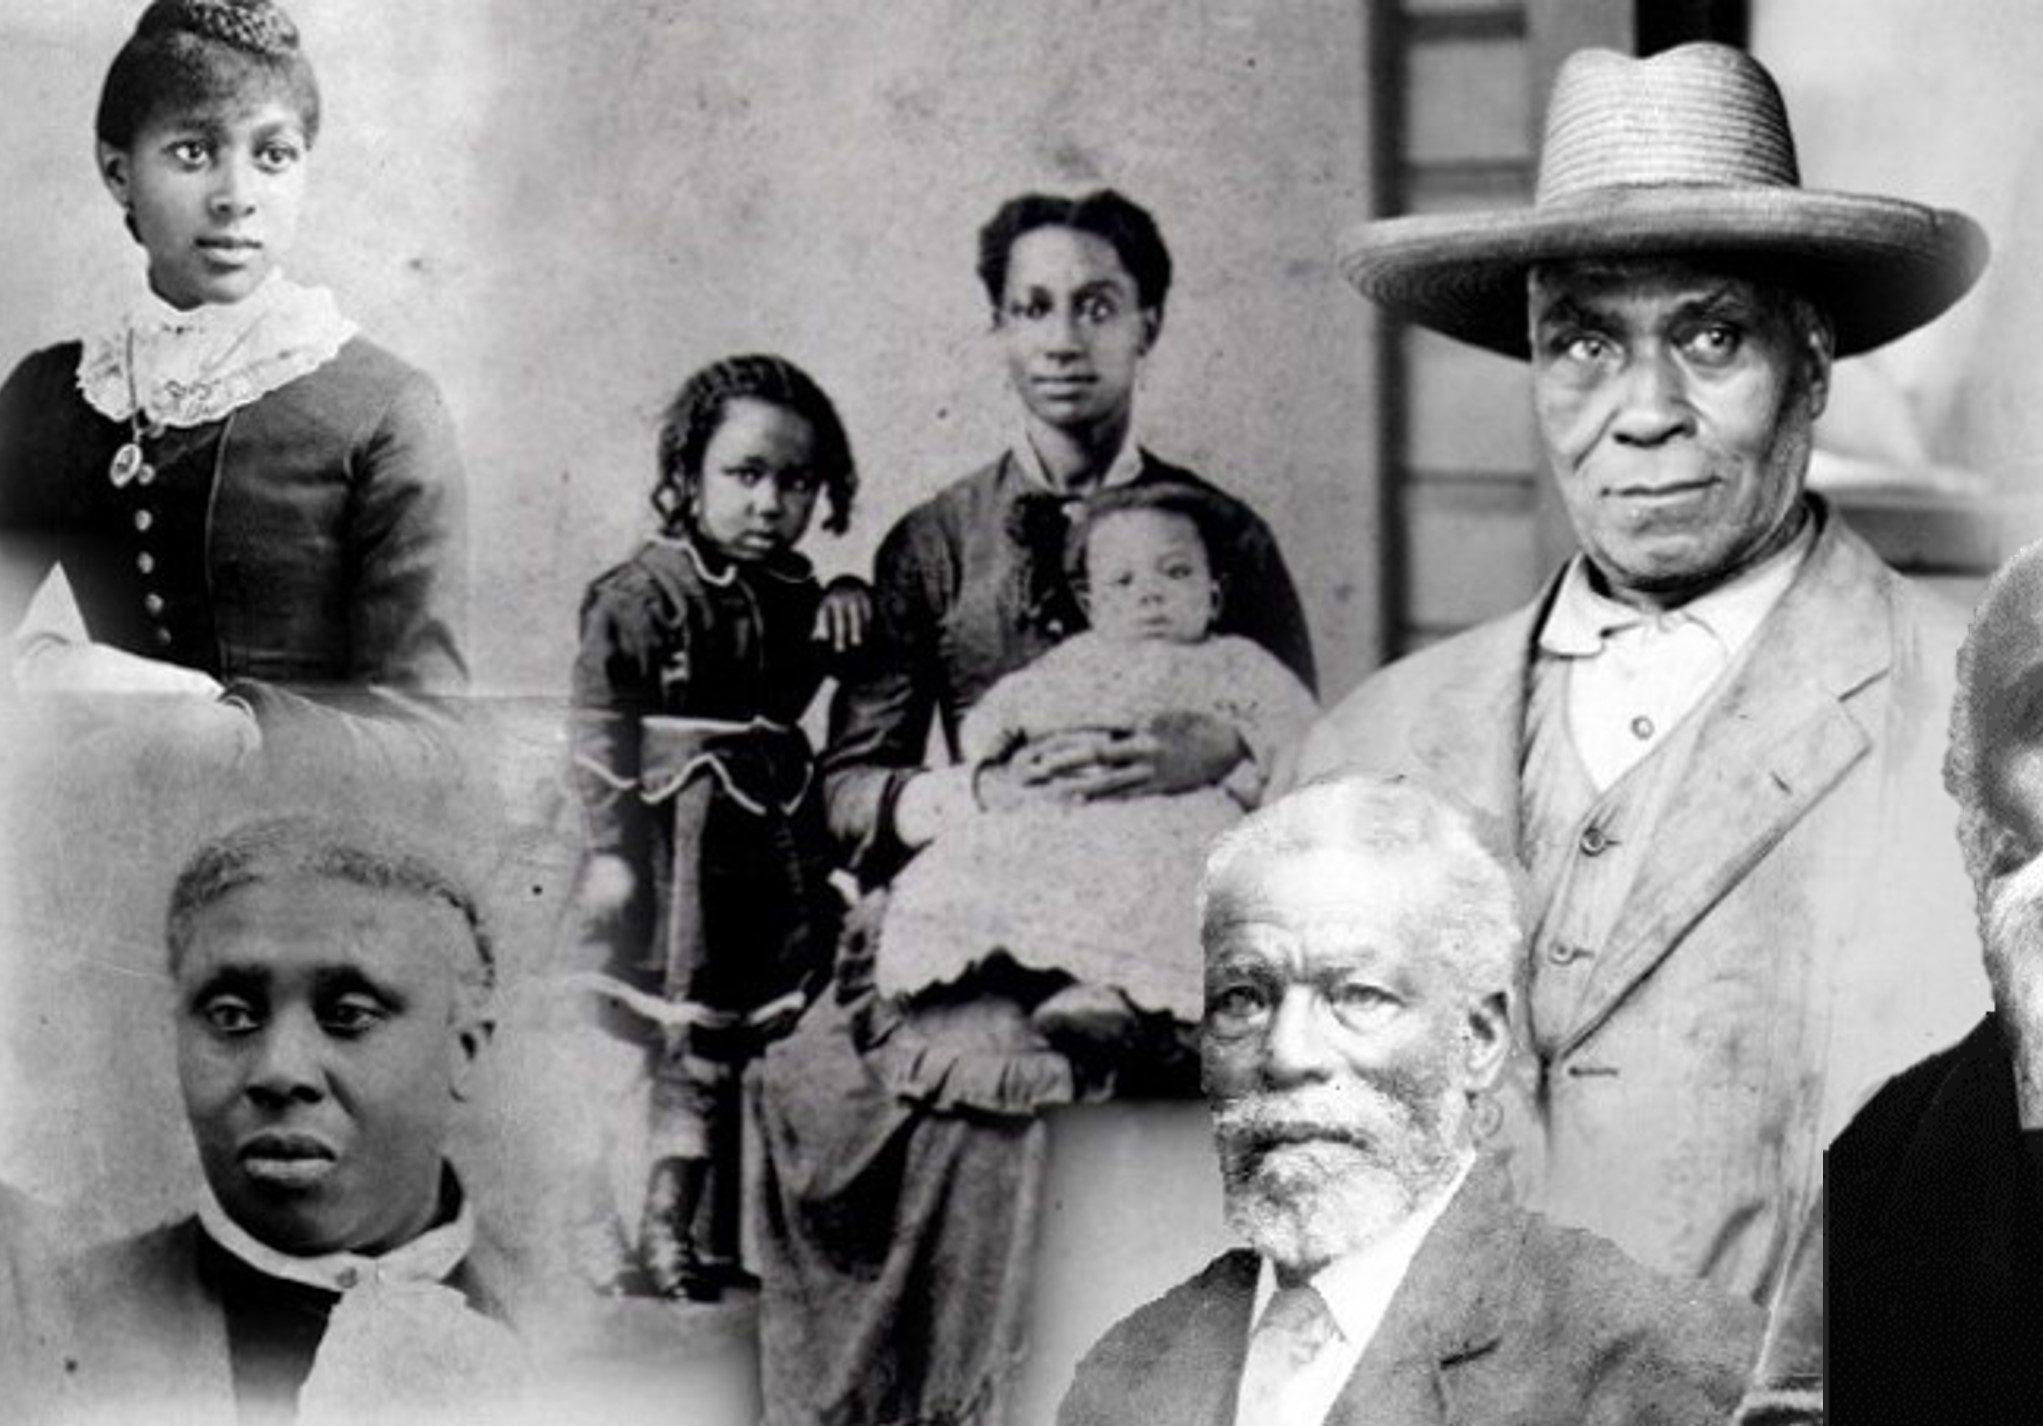 Collage of faces of the Black men, women and children of varying ages who came to BC in 1858